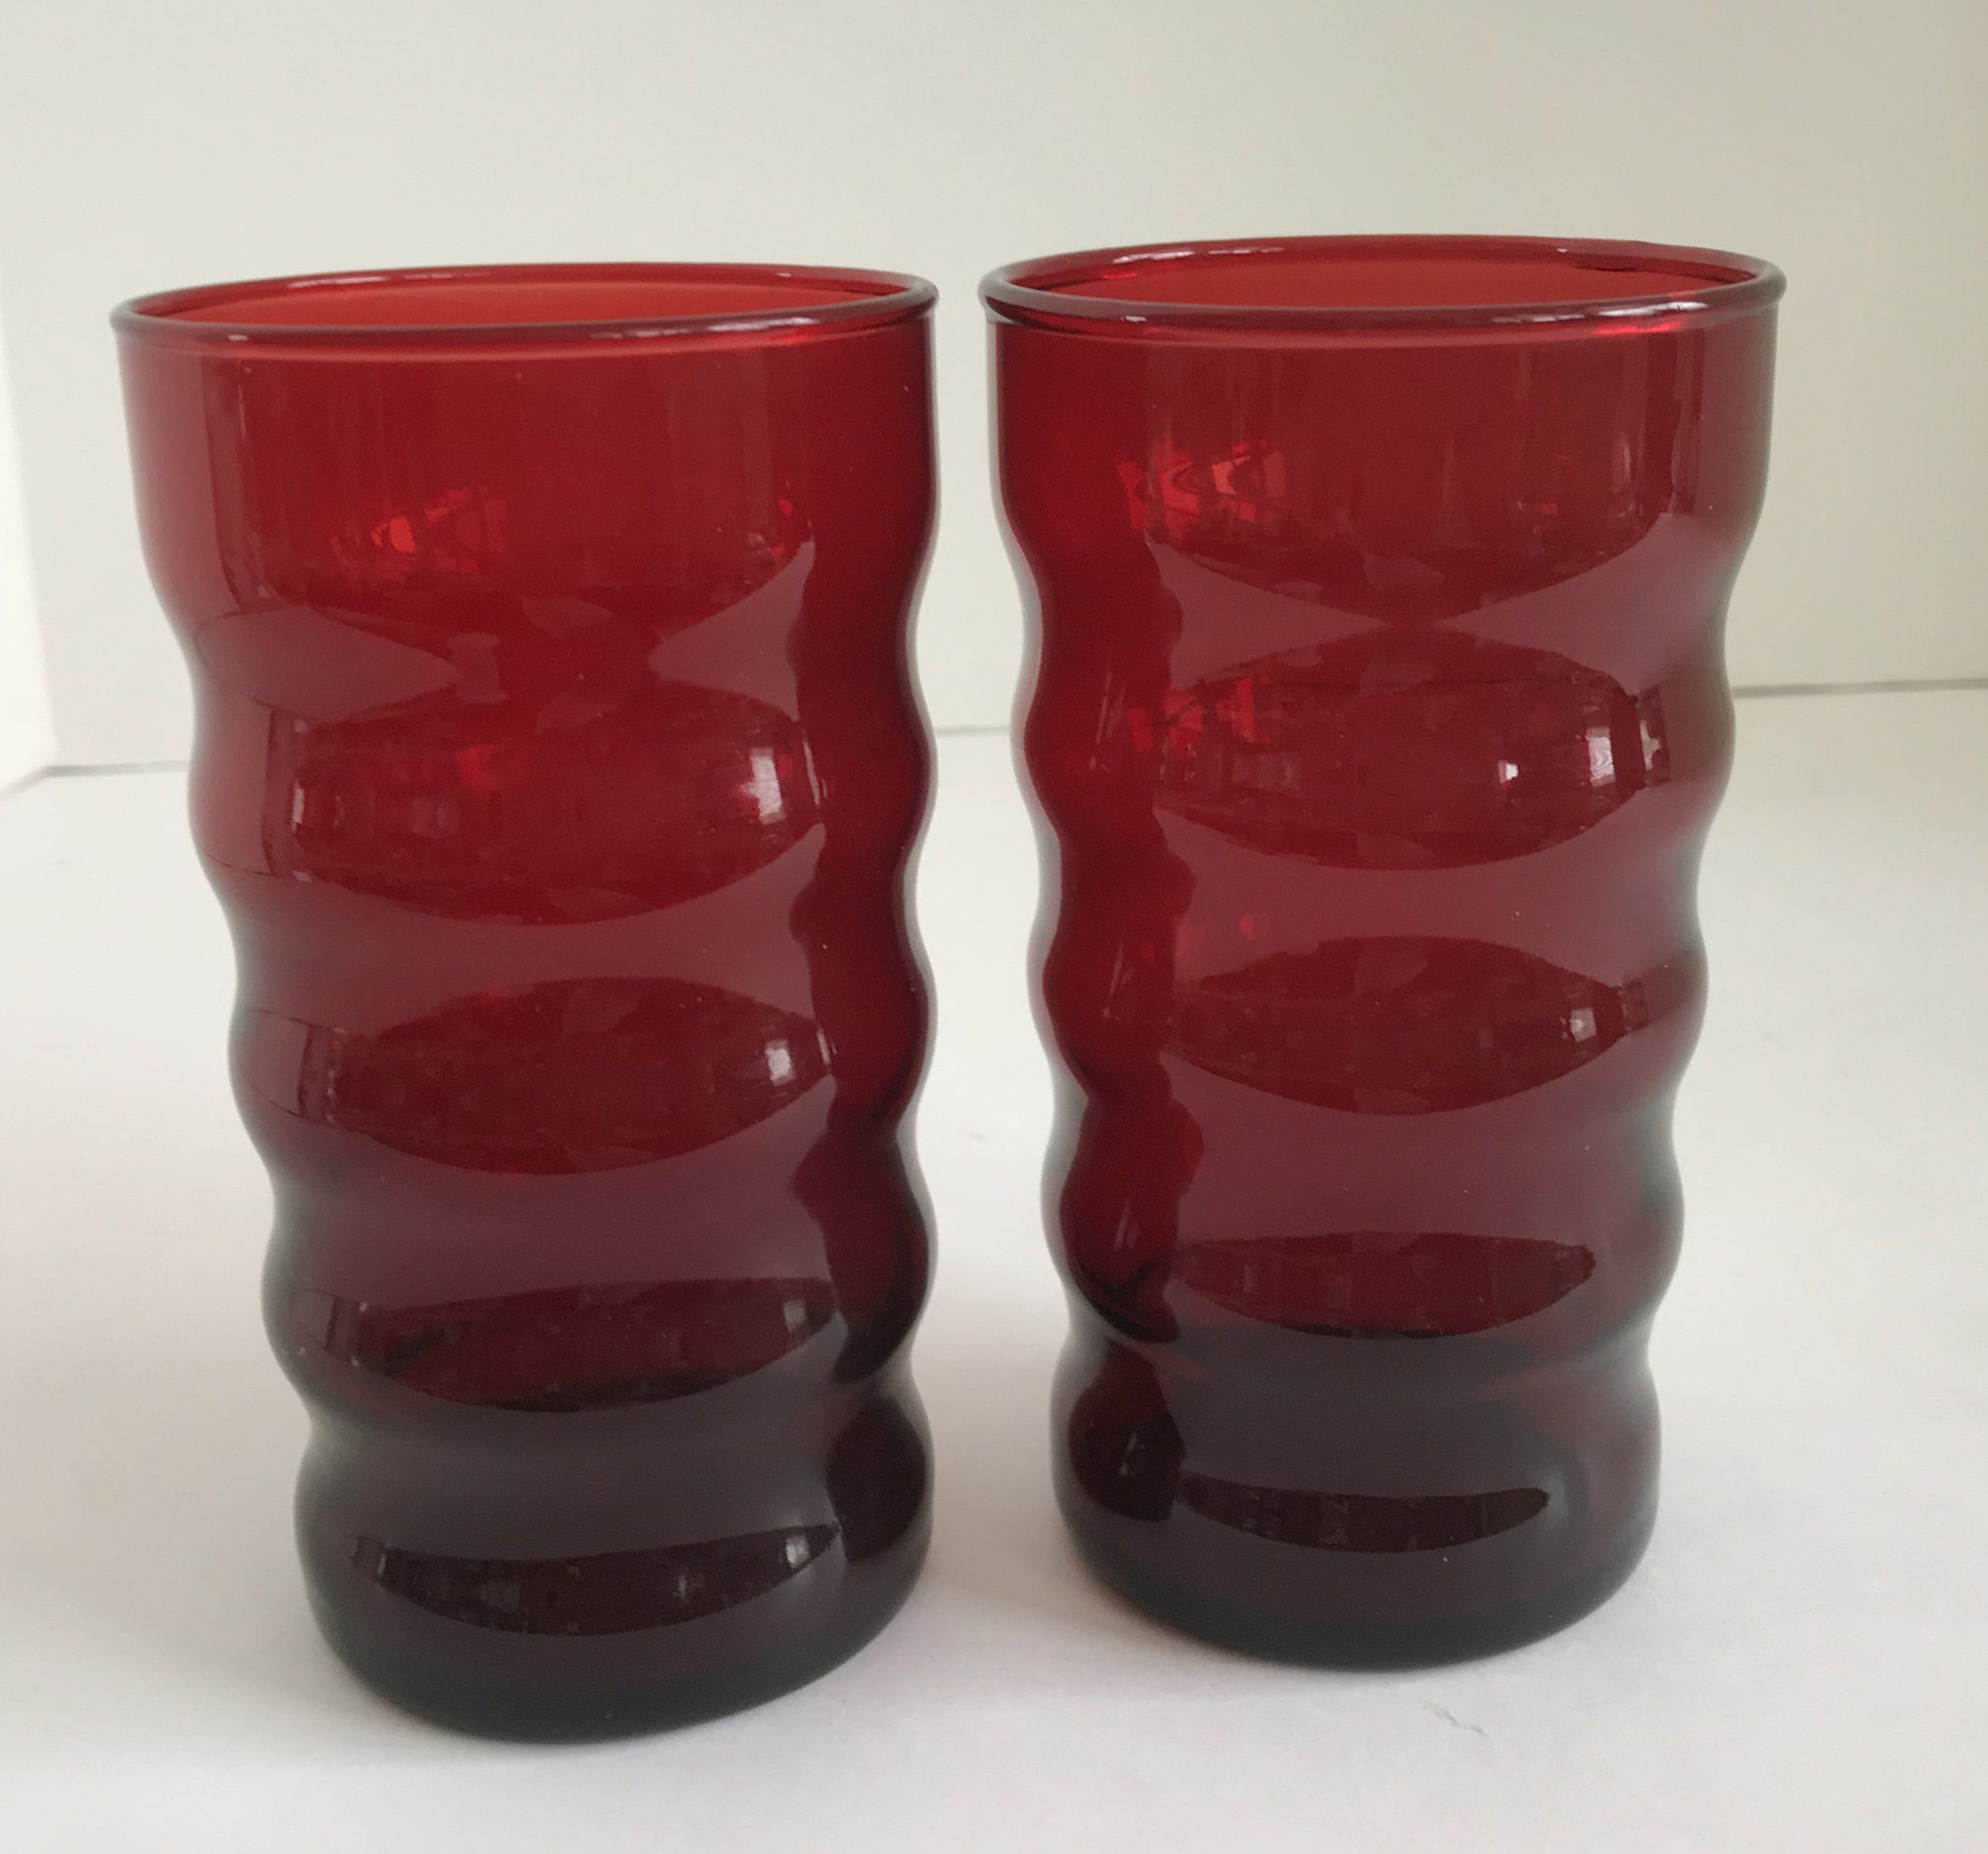 18 Recommended Anchor Hocking Glass Vases 2022 free download anchor hocking glass vases of vintage set of 2 mid century anchor hocking royal ruby red ribbed in vintage set of 2 mid century anchor hocking royal ruby red ribbed drinking glasses